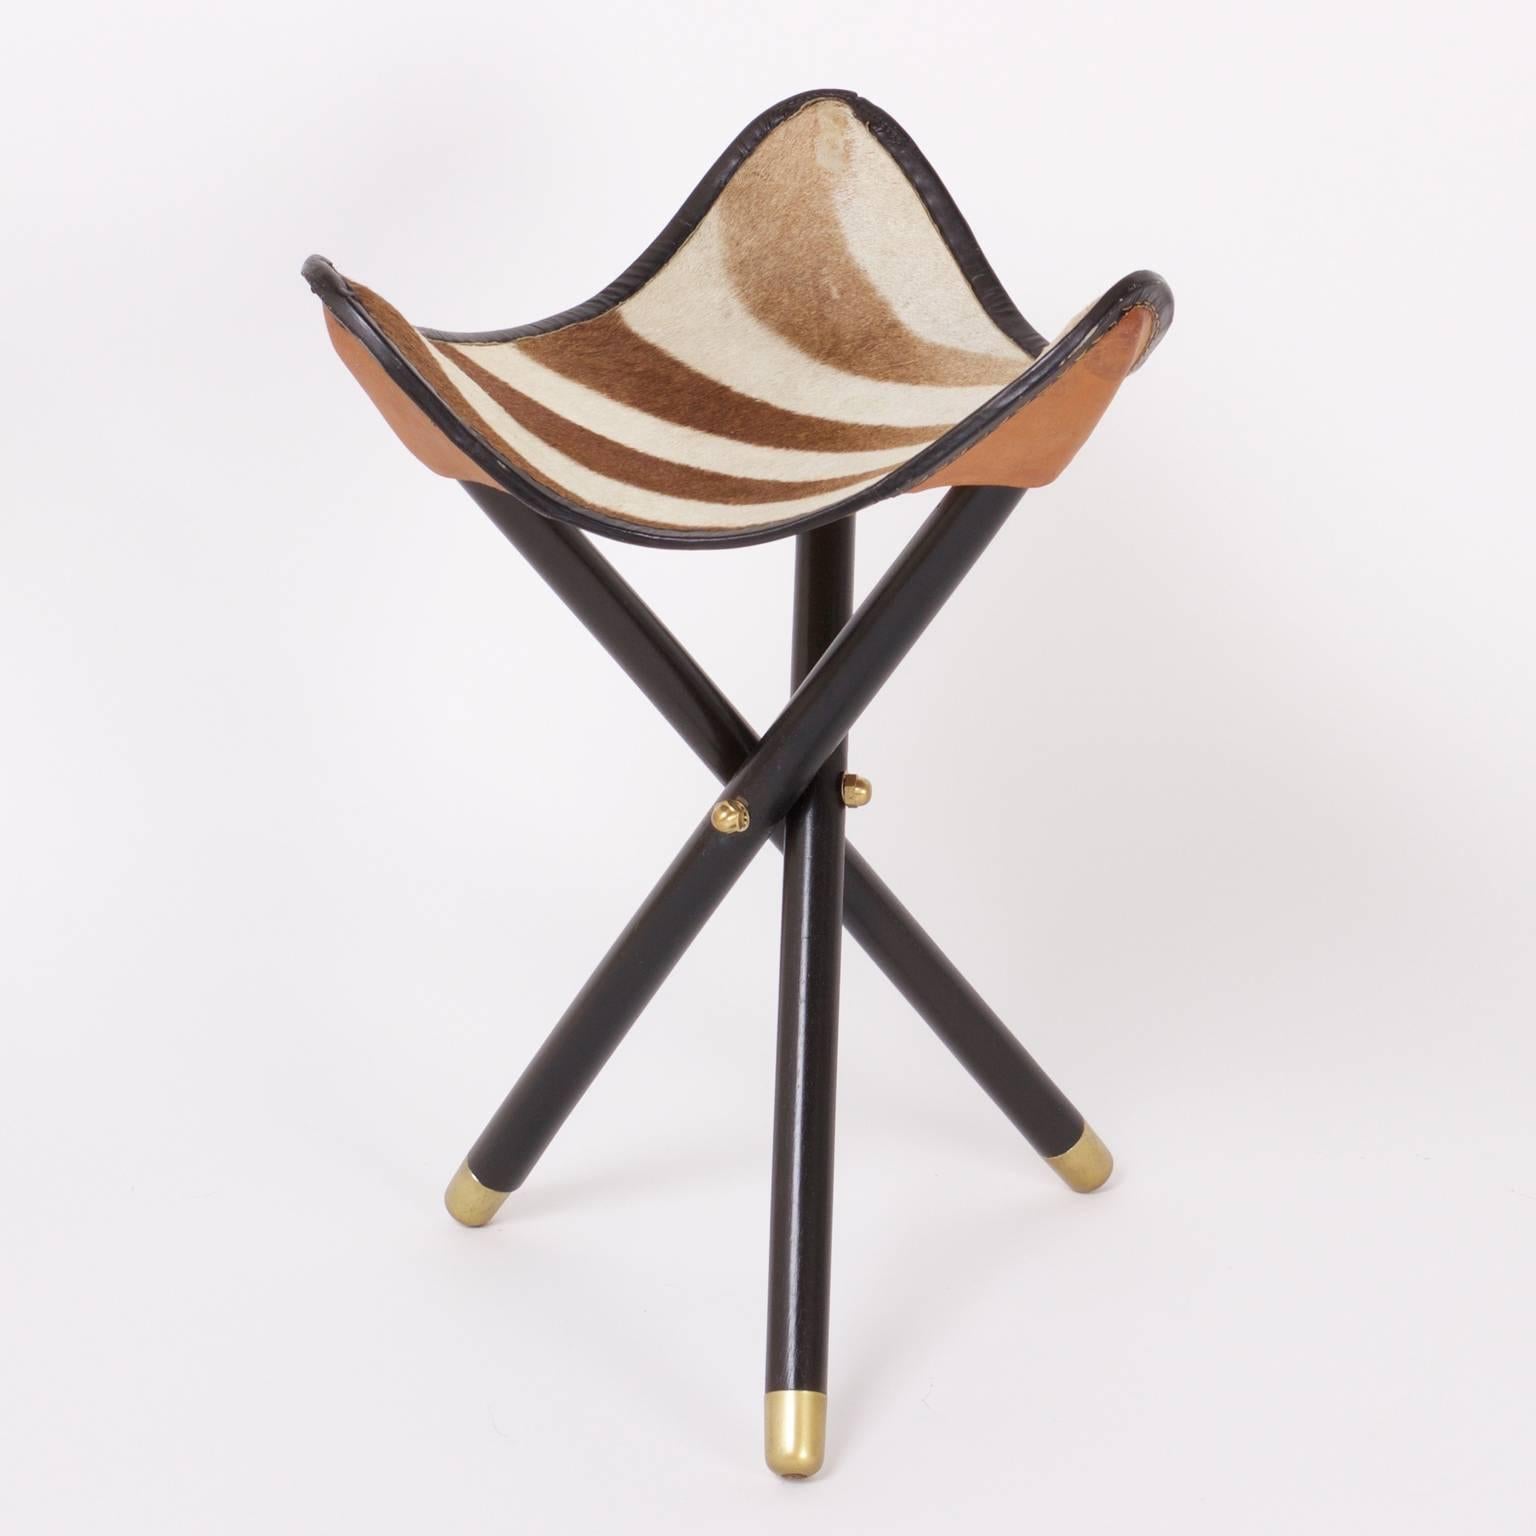 South African Group of Four Campaign Style Zebra Hide Folding Stools, Available Individually